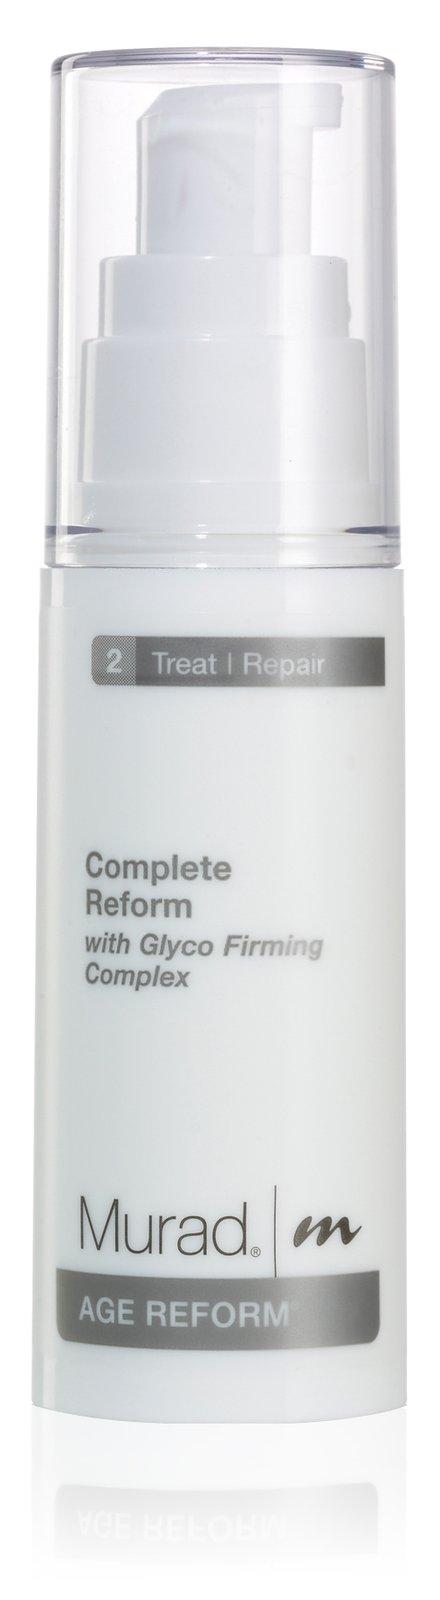 Murad Age Reform Complete Reform With Glyco Firming Complex-1oz